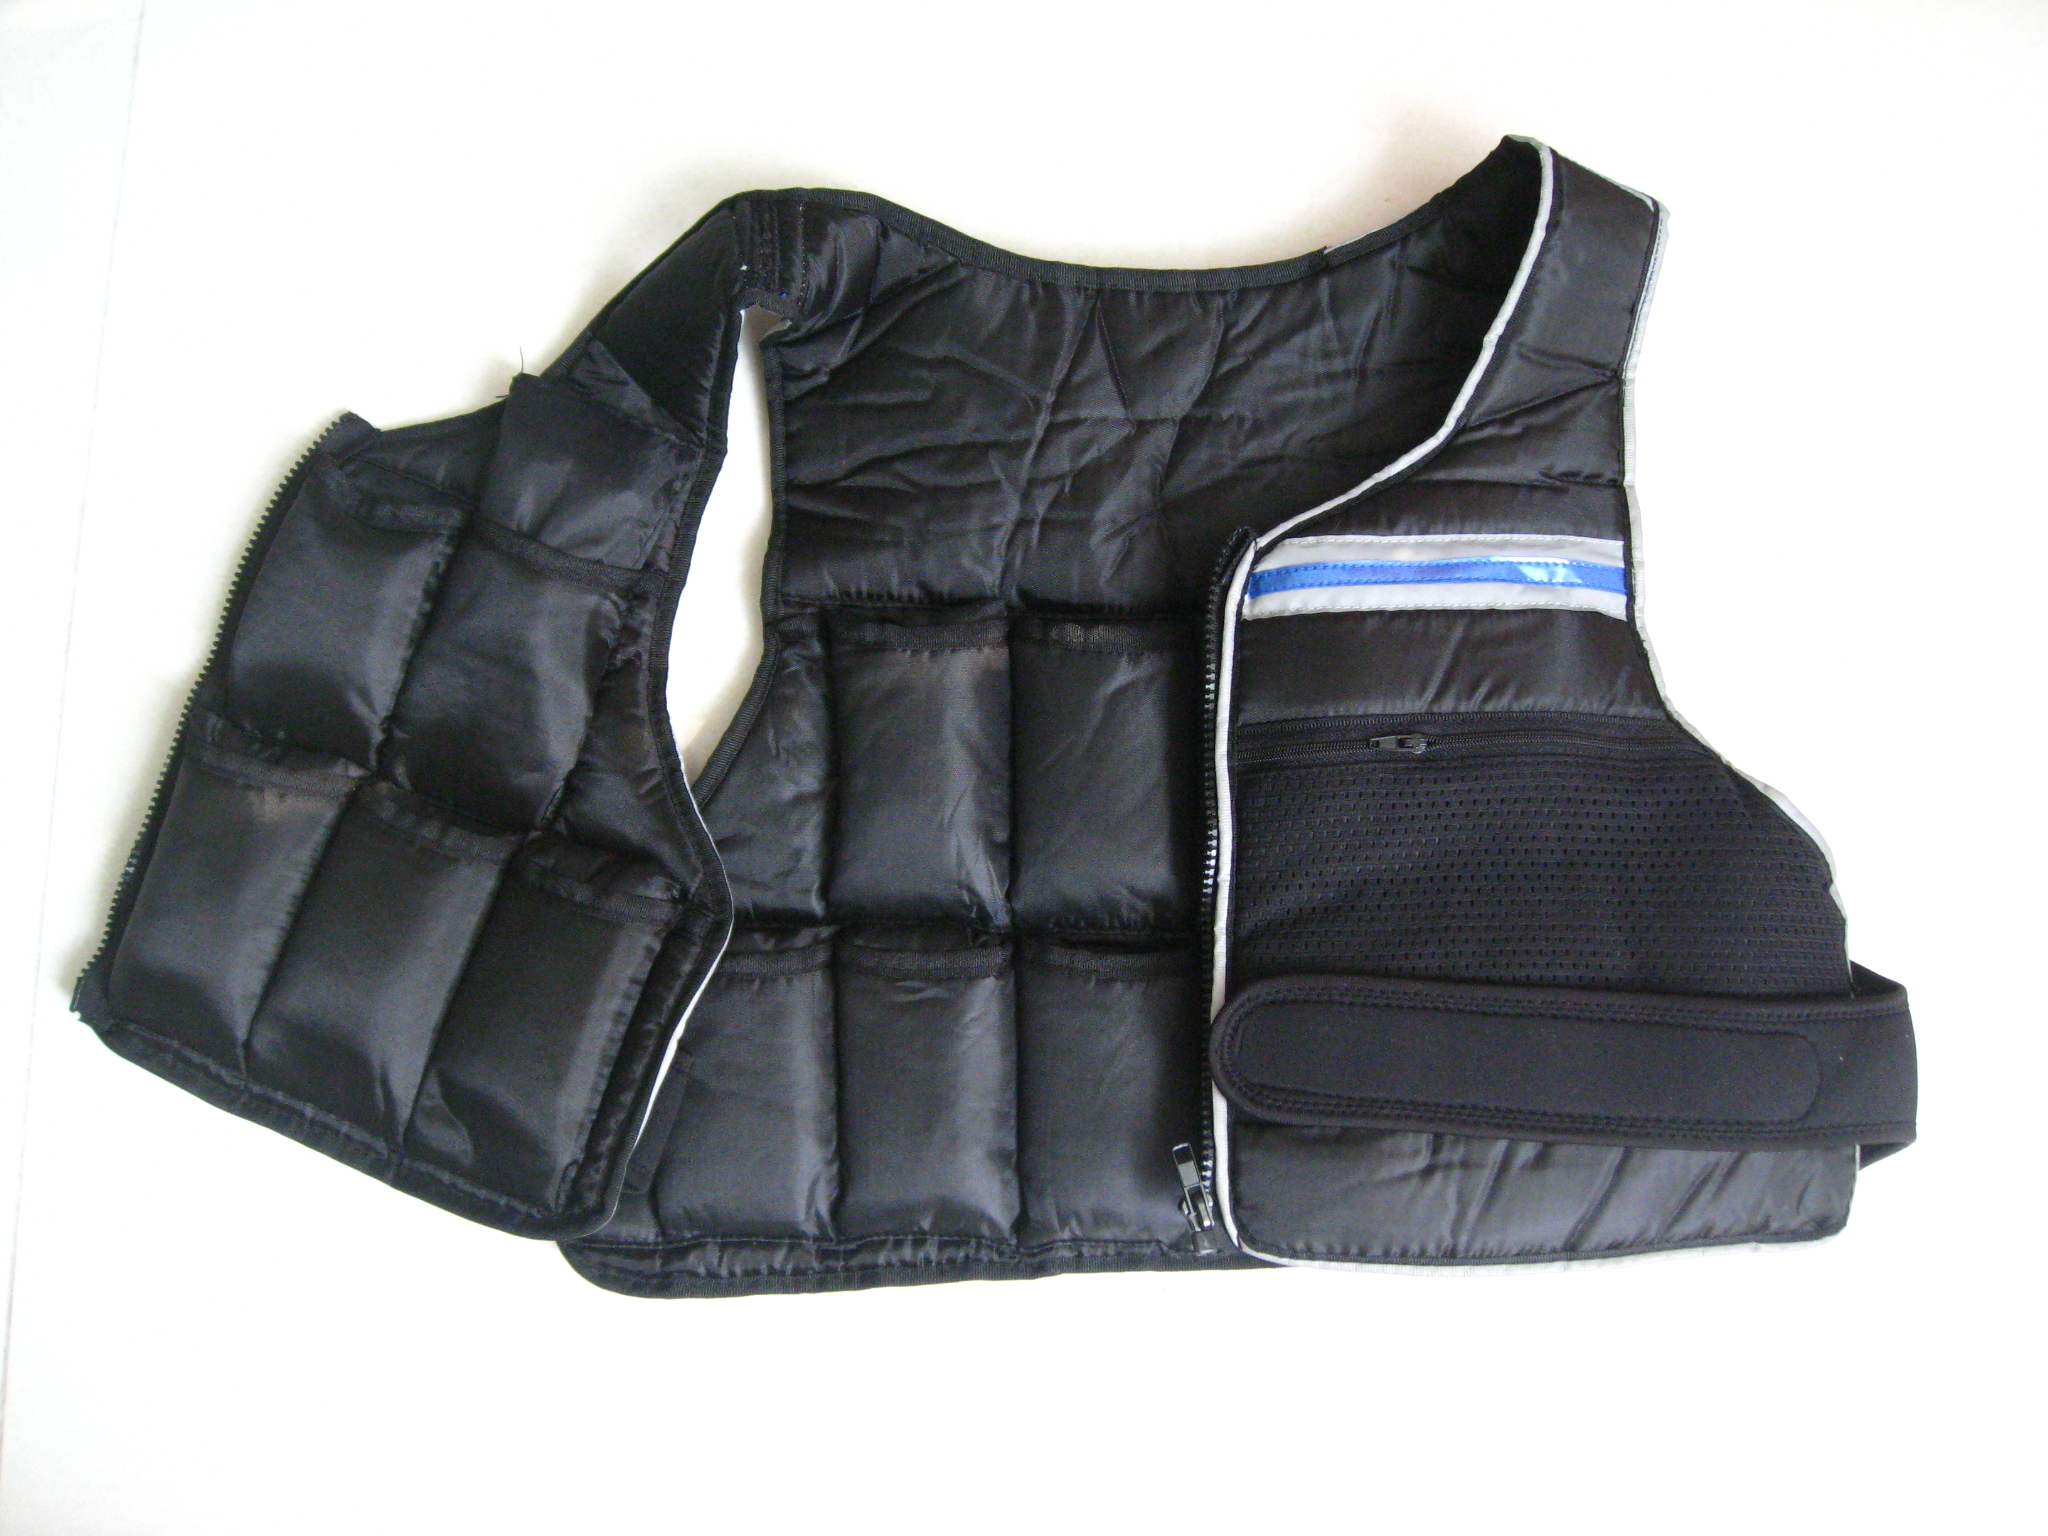 Weight Vest DY-F-006